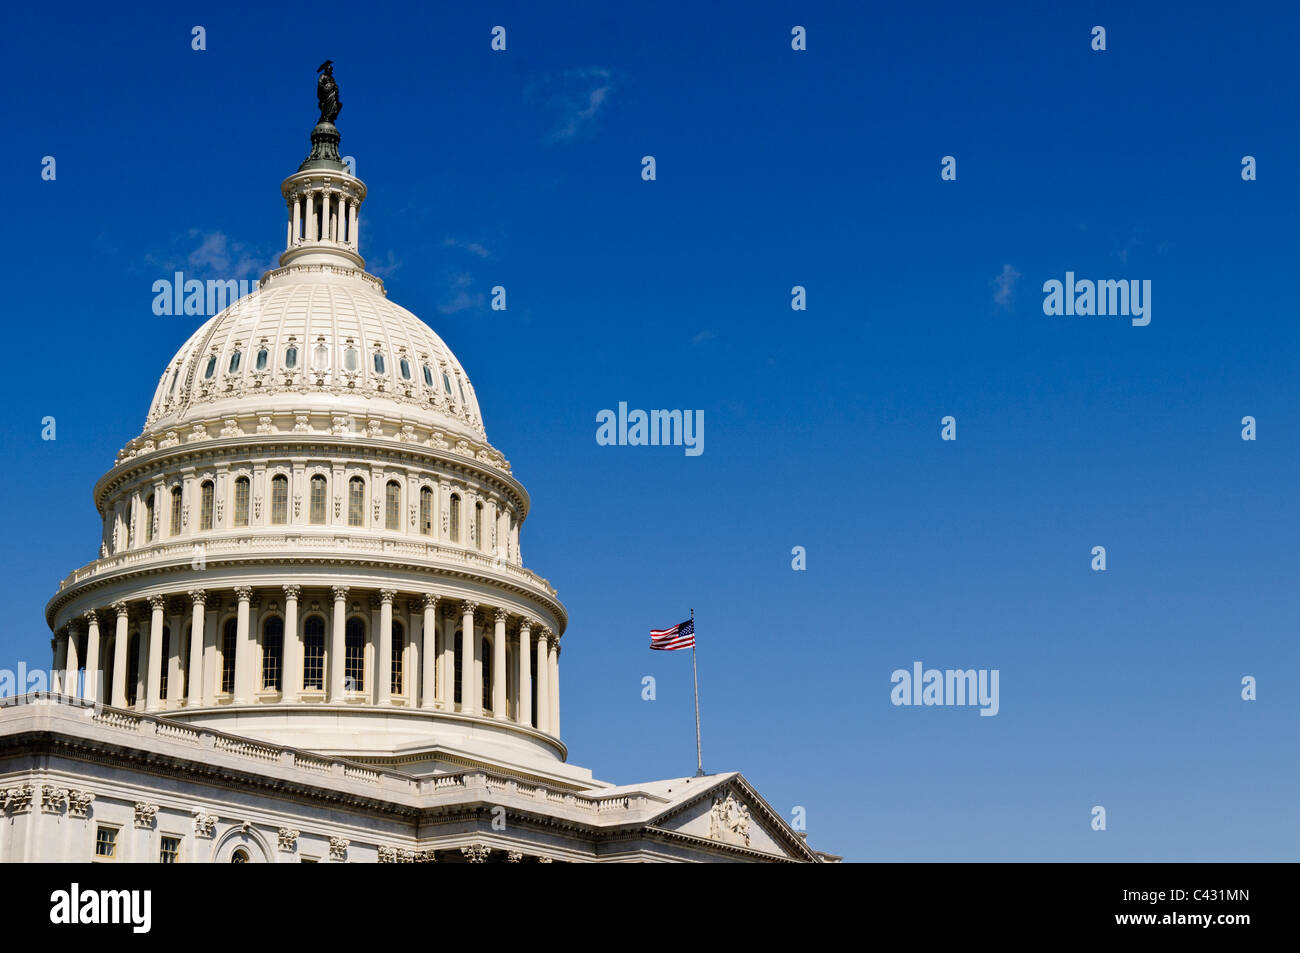 WASHINGTON DC, USA - The US Capitol Building against a clear blue sky in Washington DC. Stock Photo